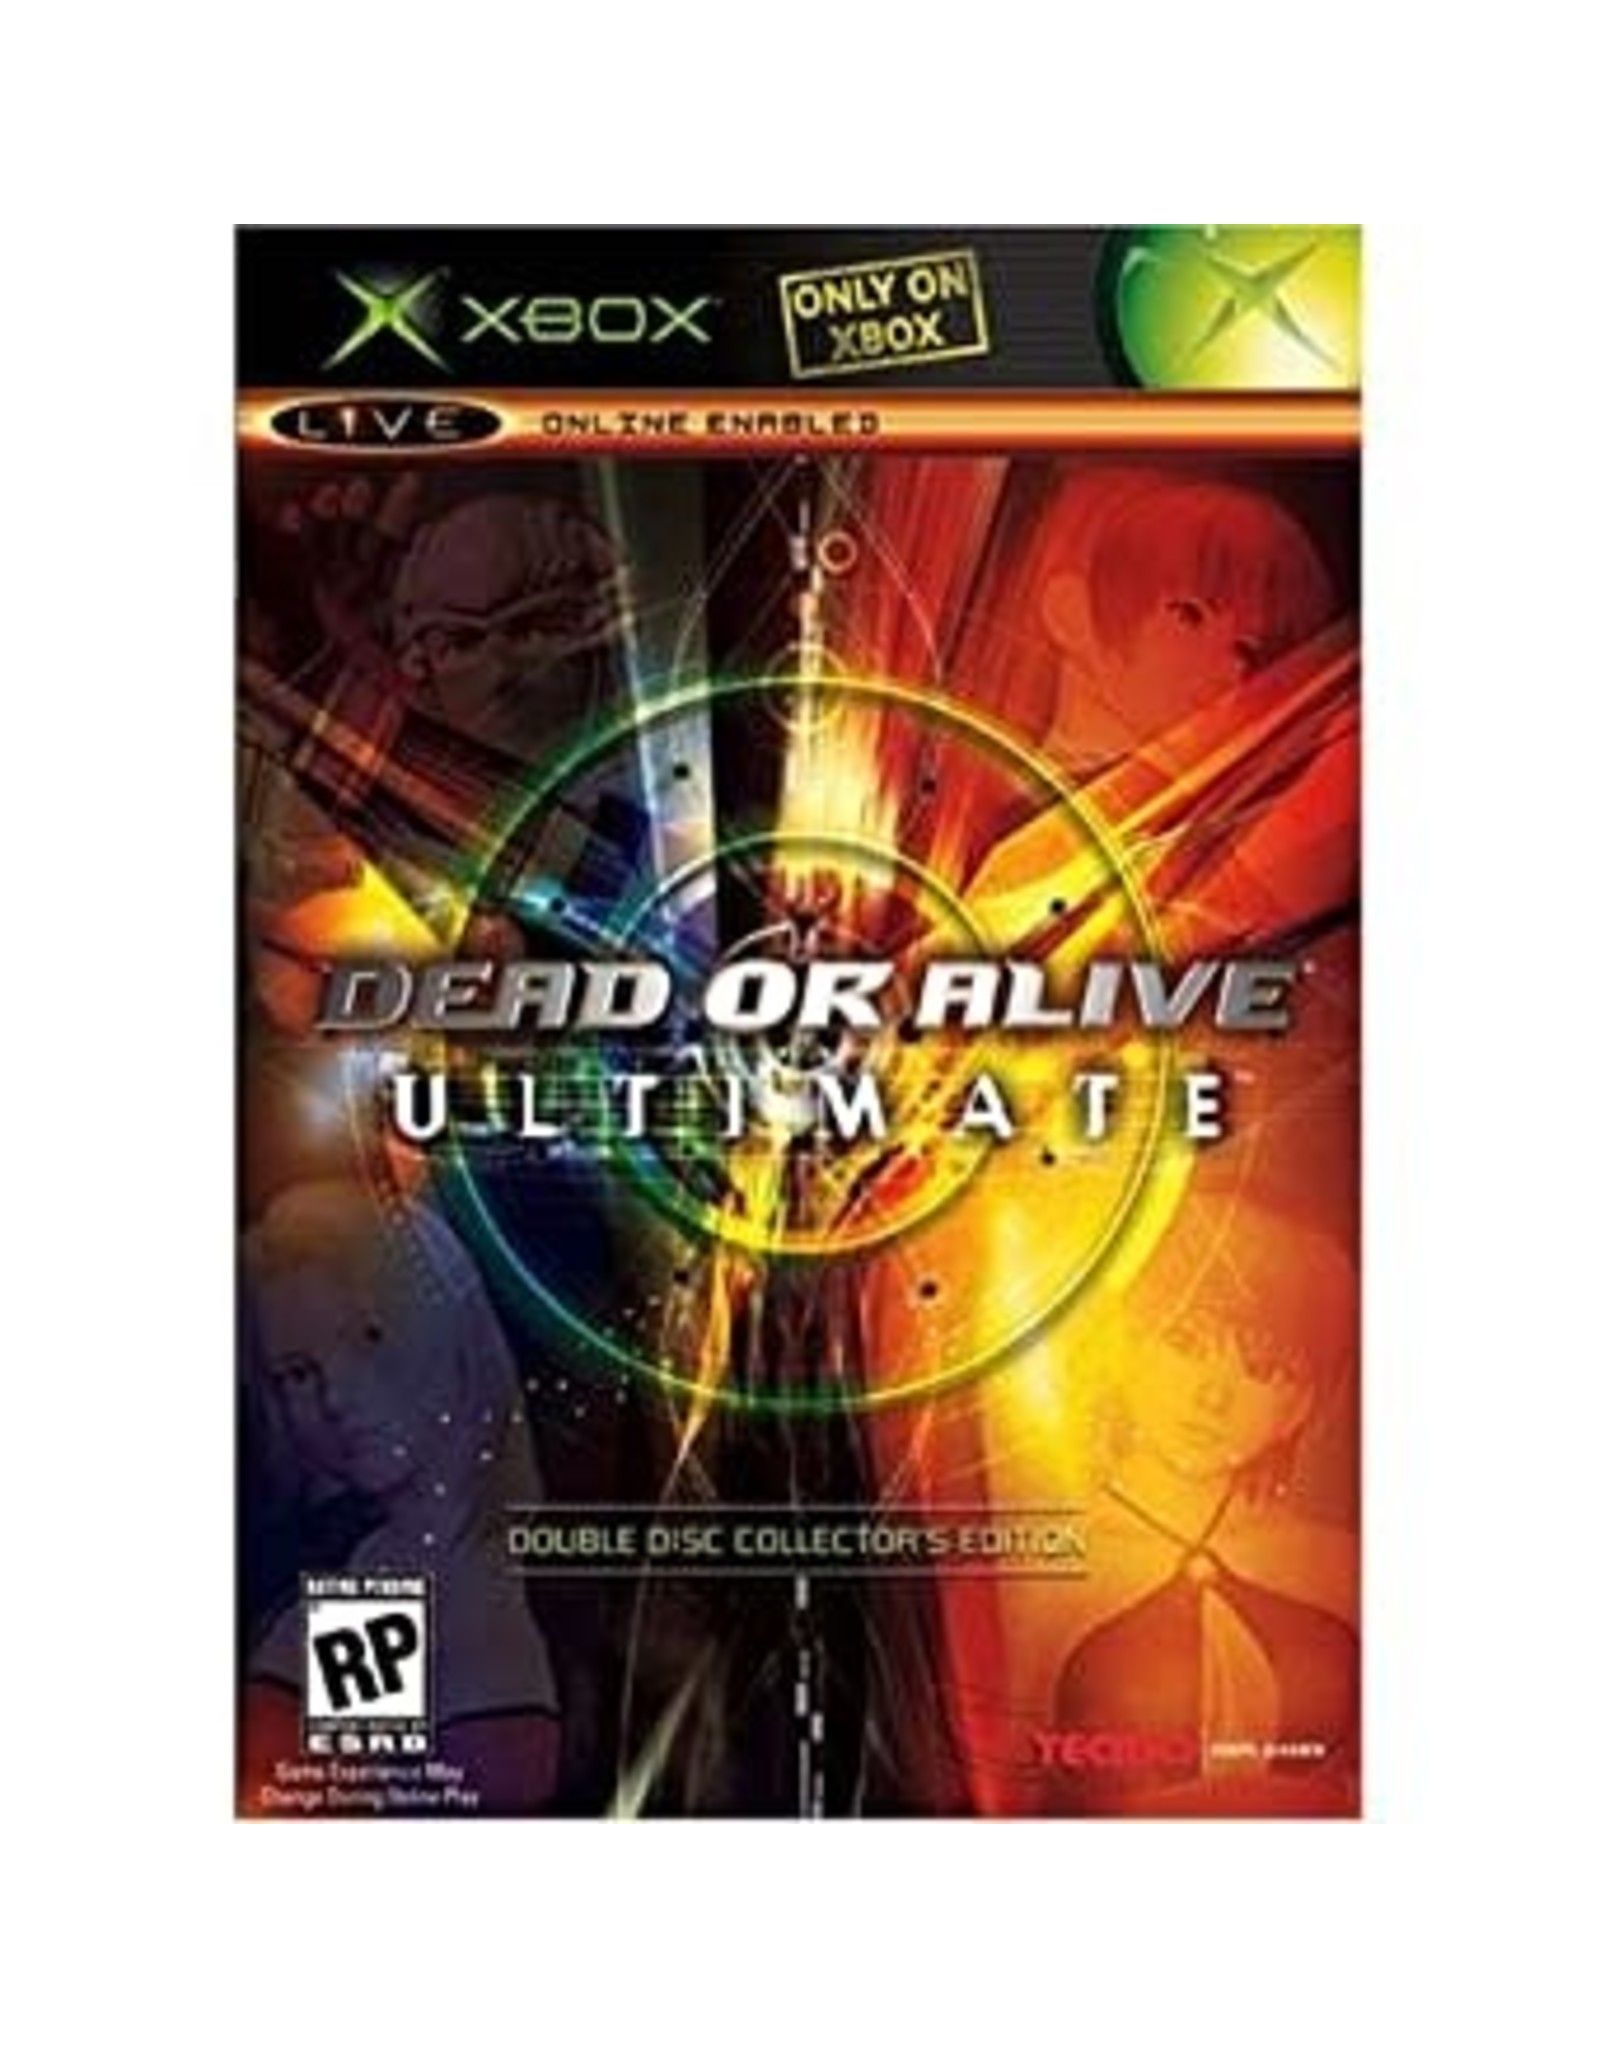 Xbox Dead or Alive Ultimate Double Pack (CiB, Damaged Outer Box)